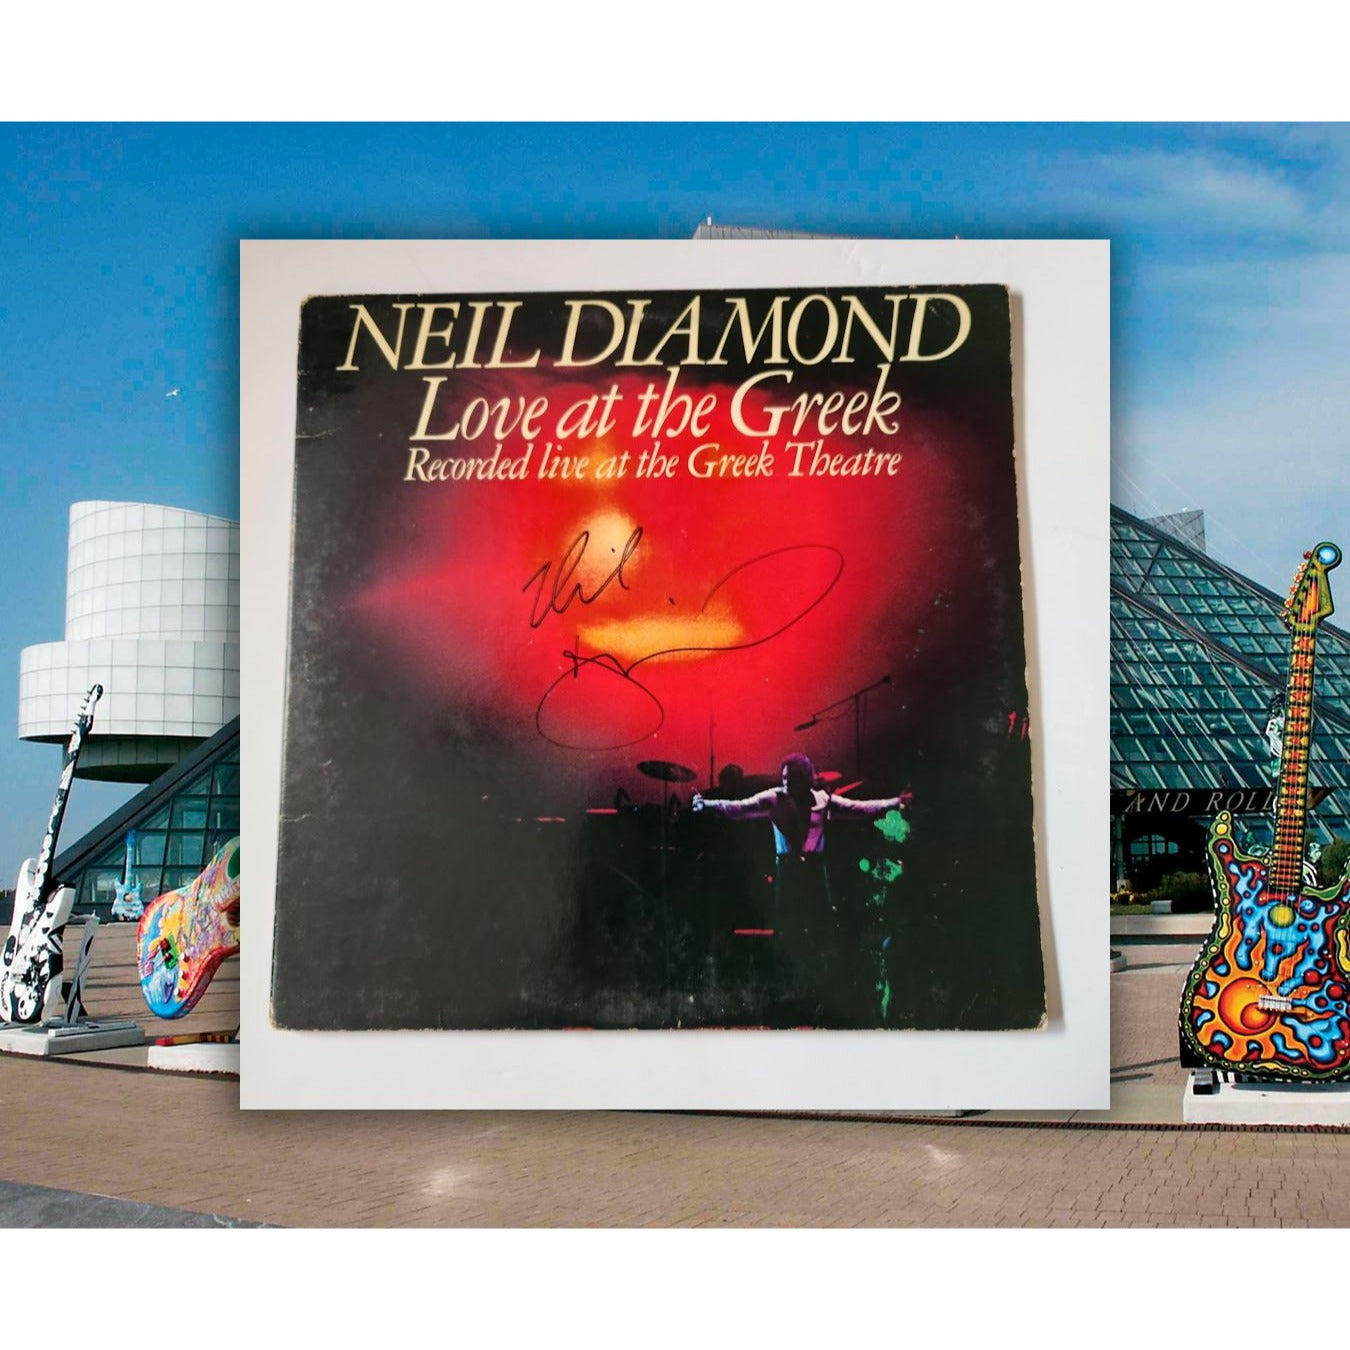 Neil Diamond Love at the Greek LP signed with proof